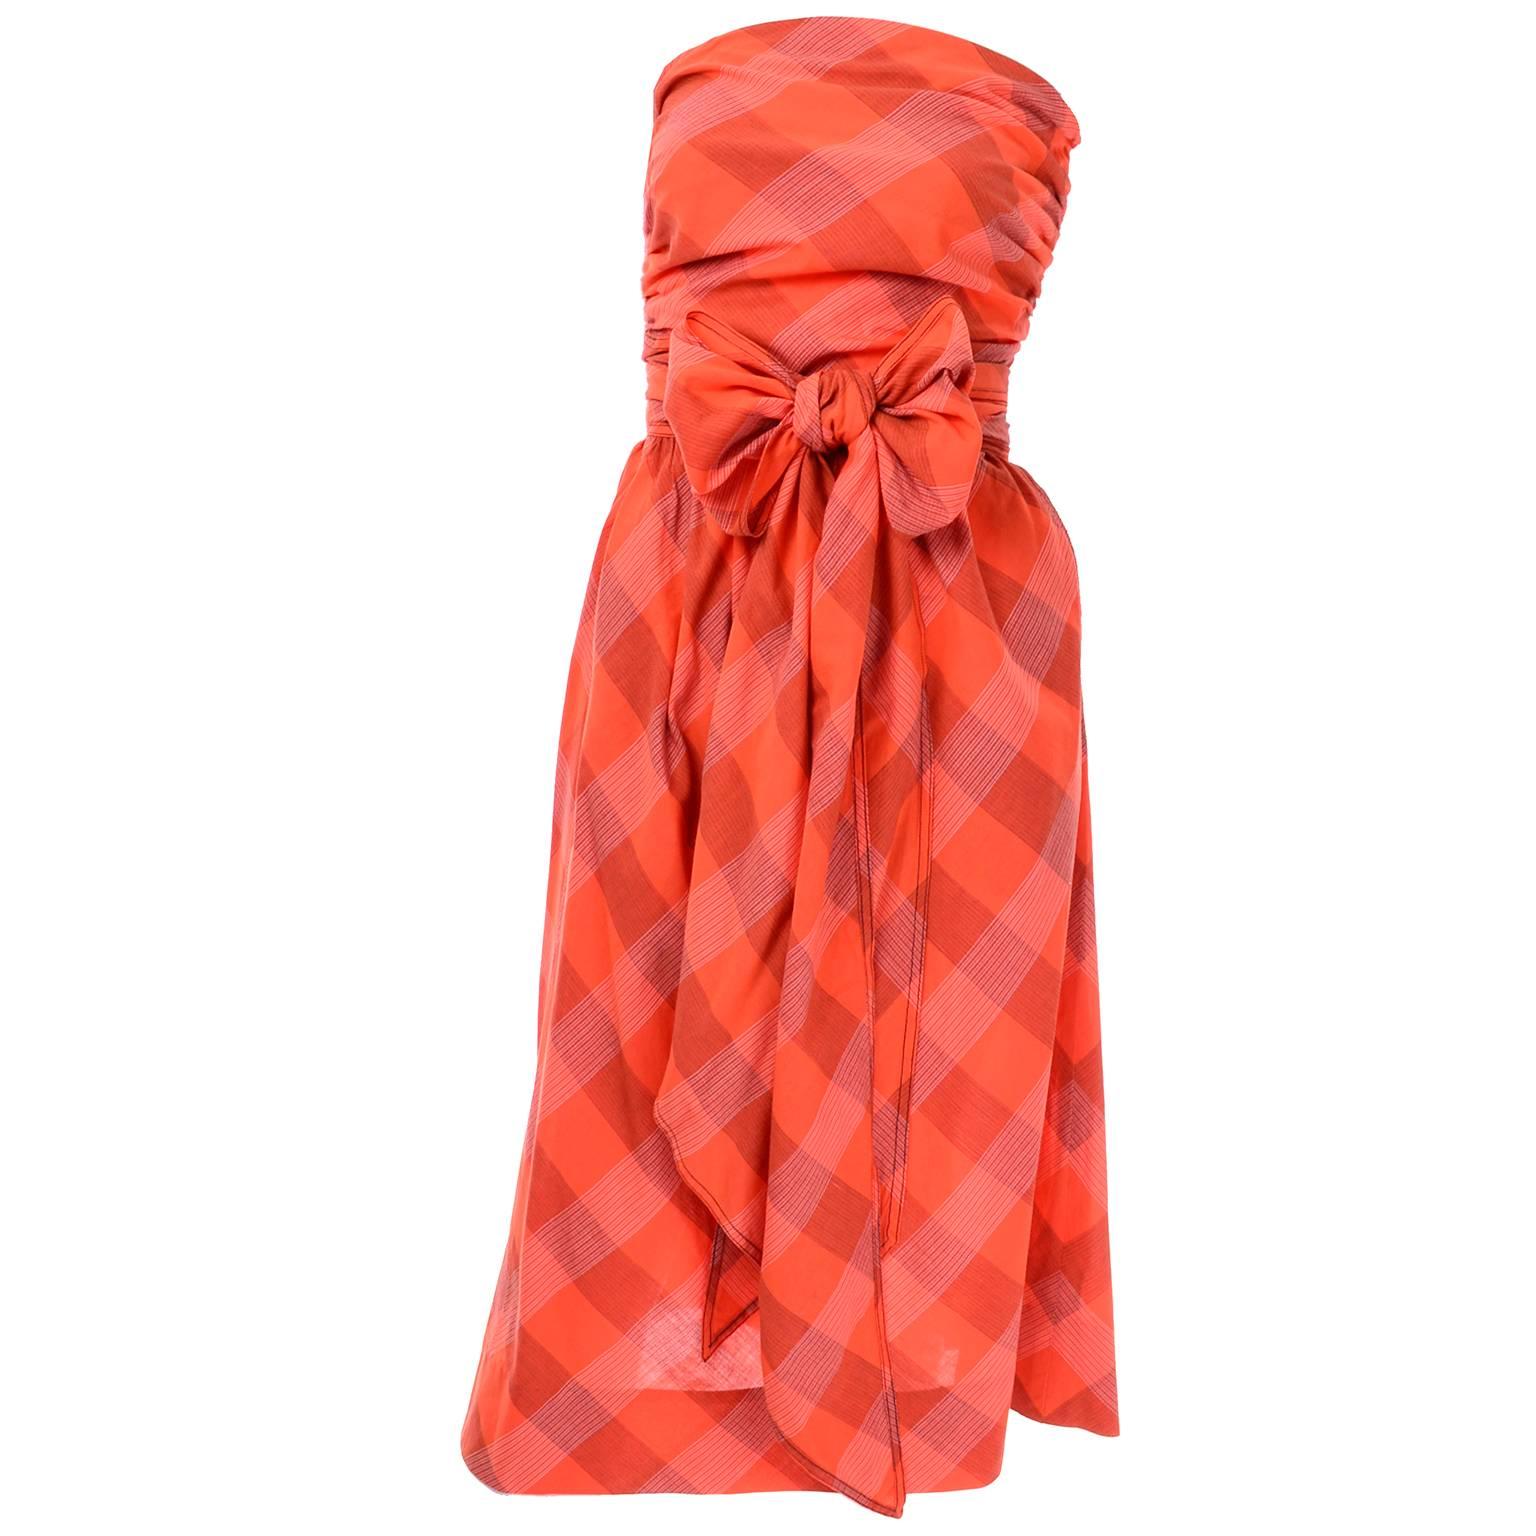 This is a gorgeous Claire McCardell vintage orange plaid cotton dress. This strapless dress closes with a side zipper at the waist and has a long attached sash that can be worn in many different ways. The dress has both the Claire McCardell clothes